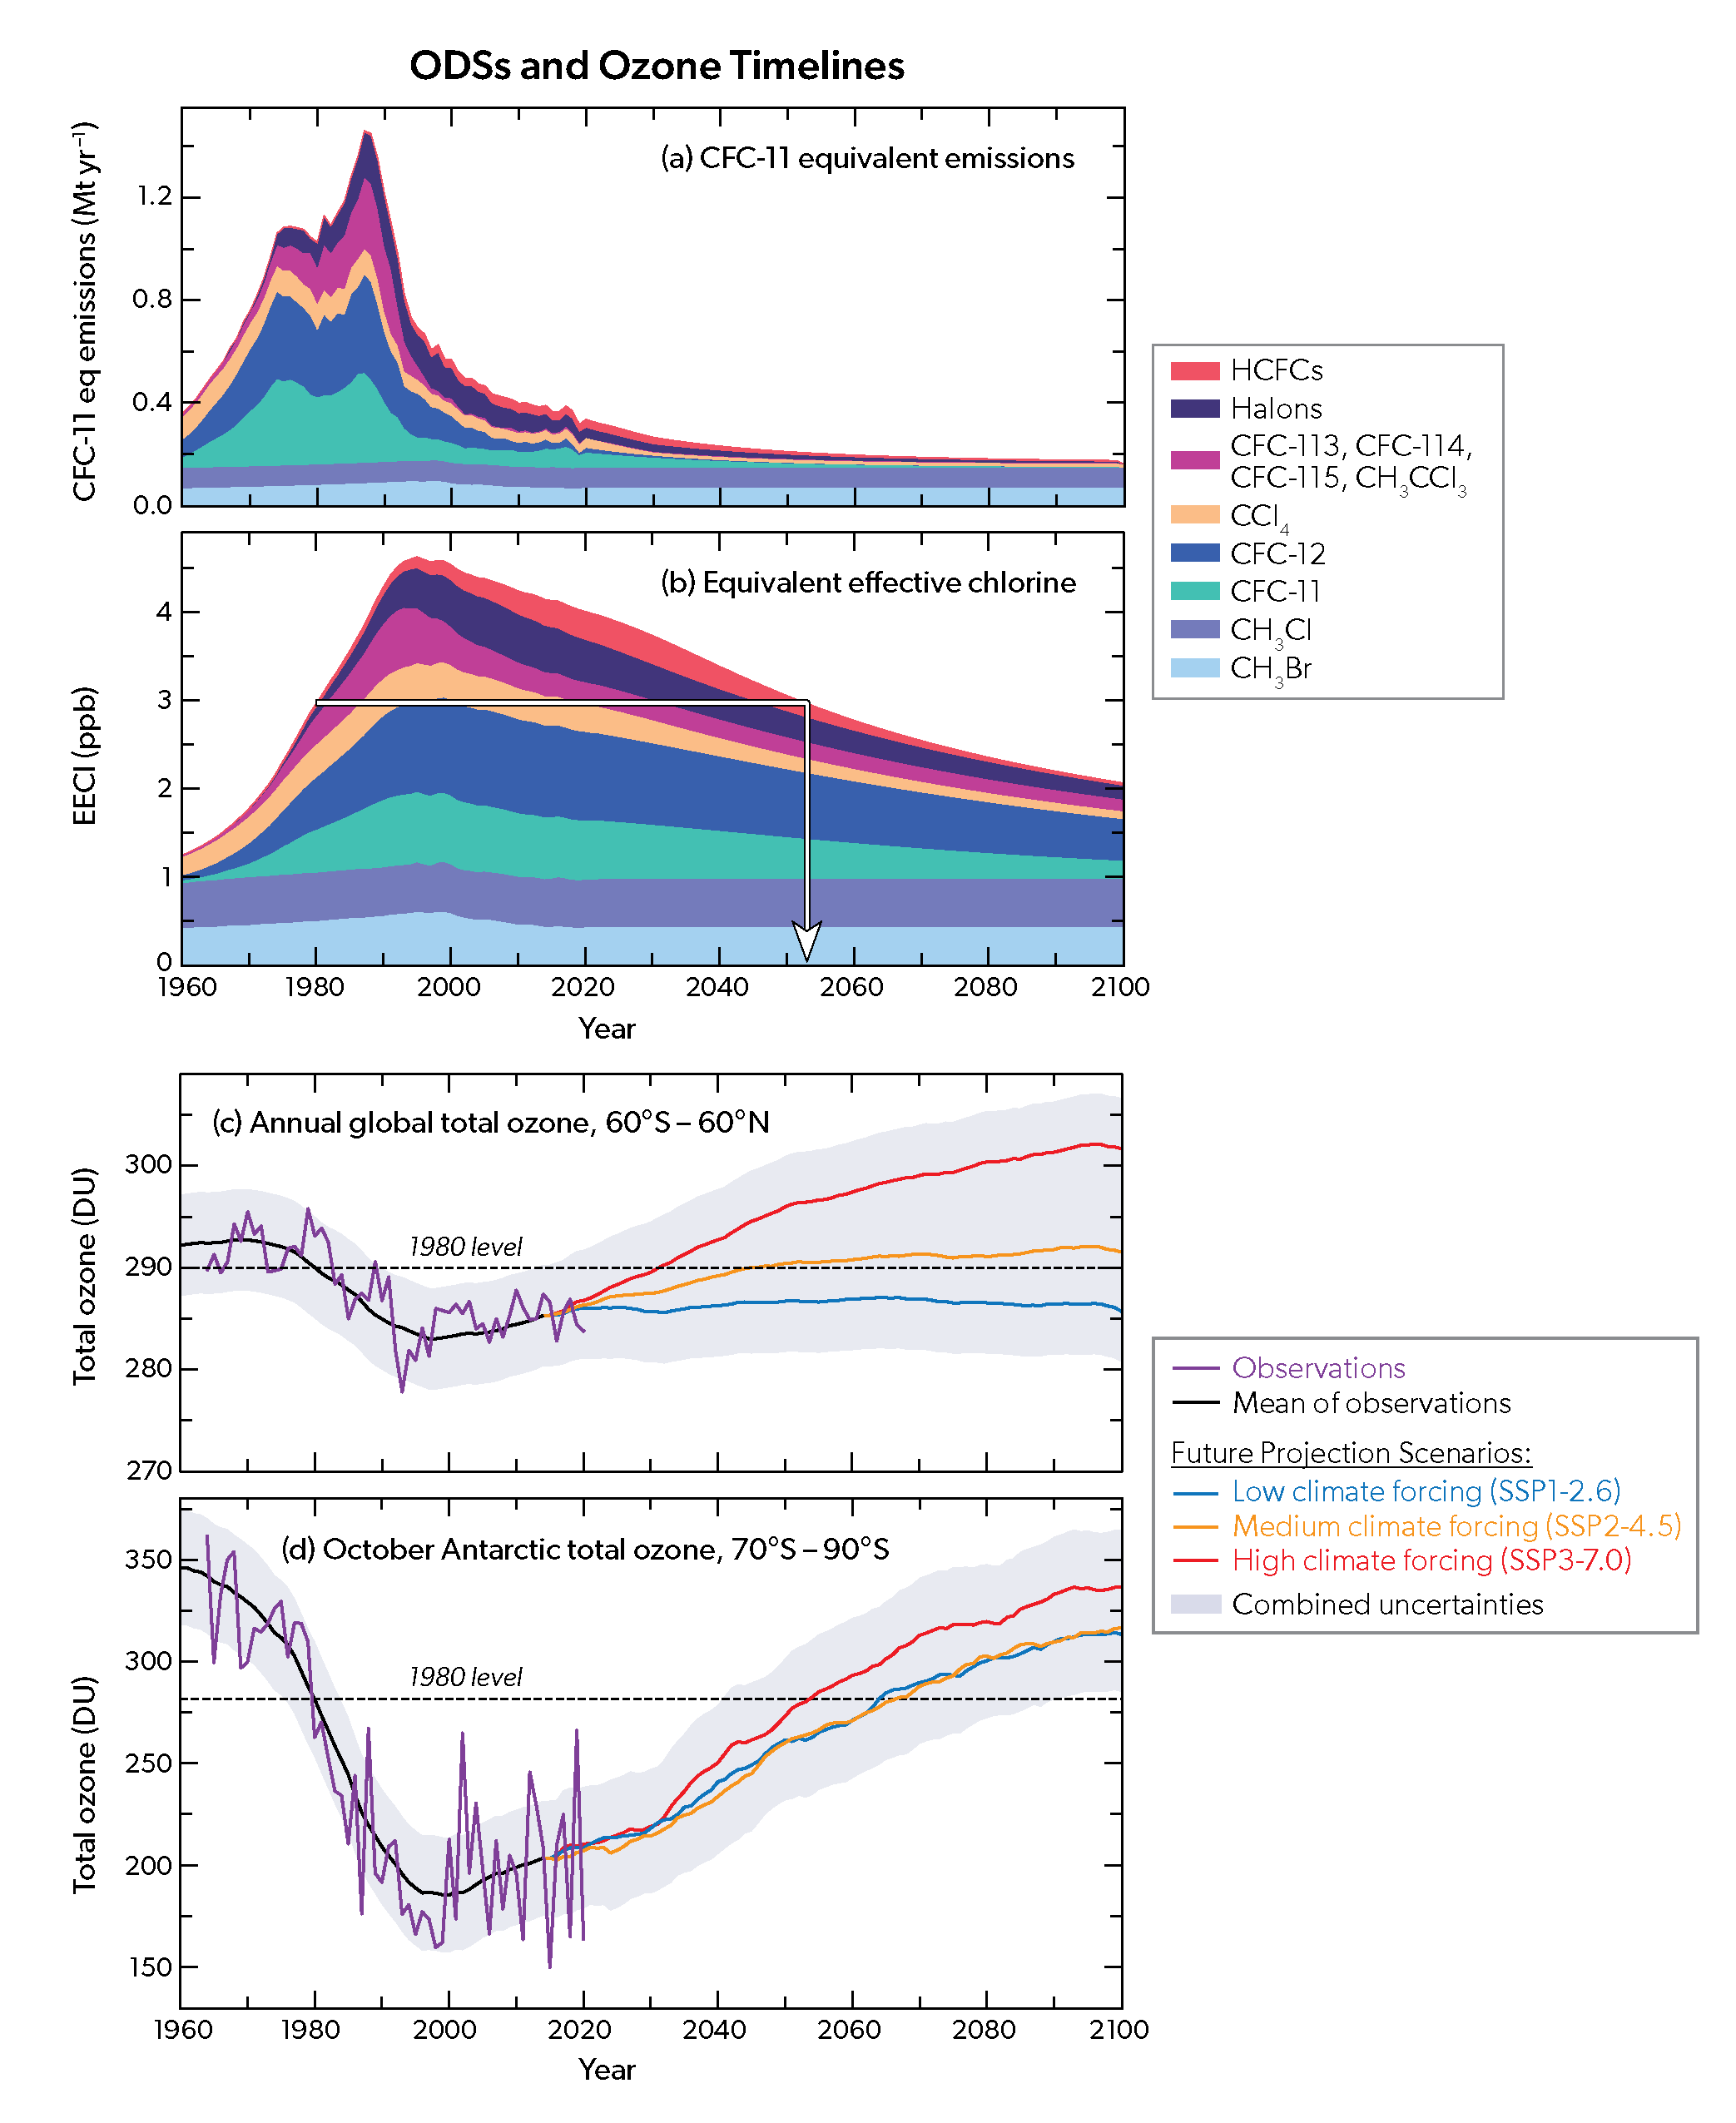 ODSs and Ozone Timelines